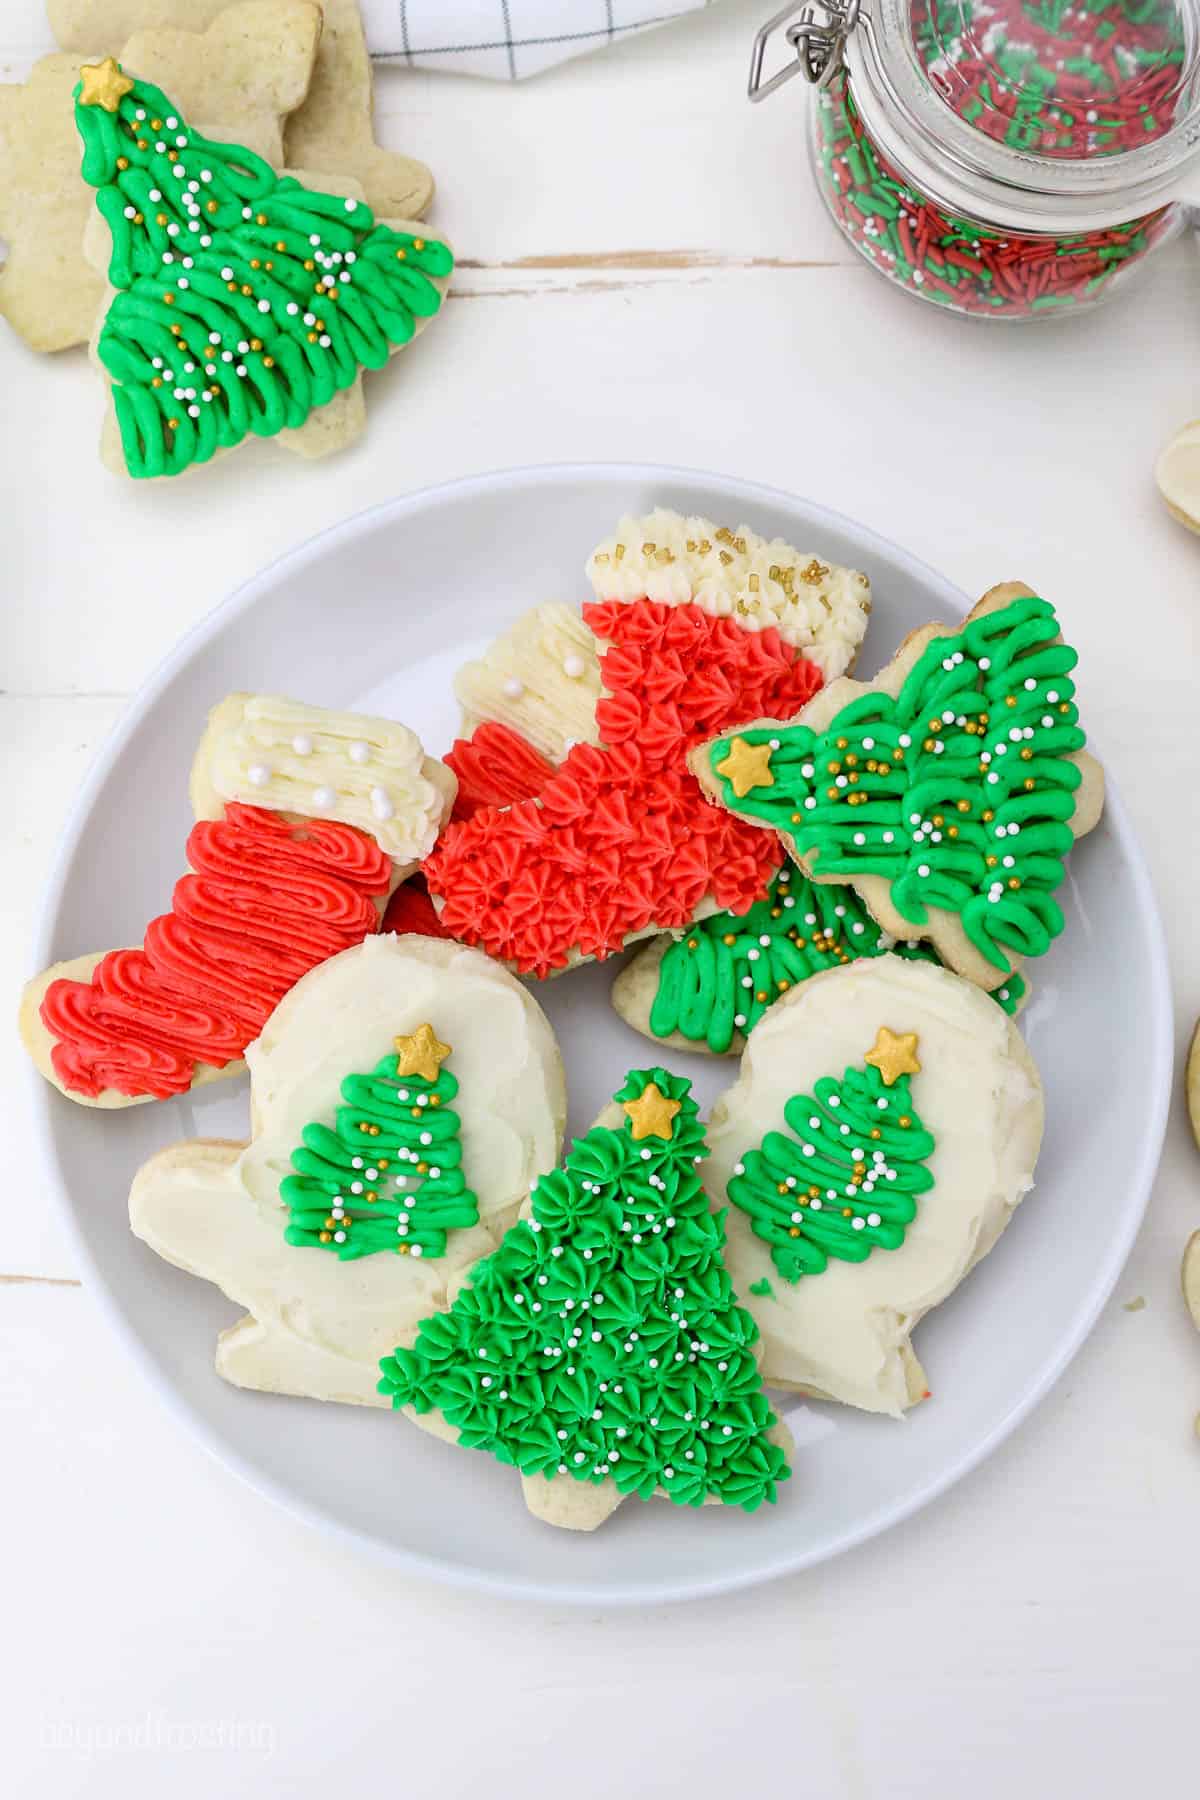 A plate of decorated sugar cookies